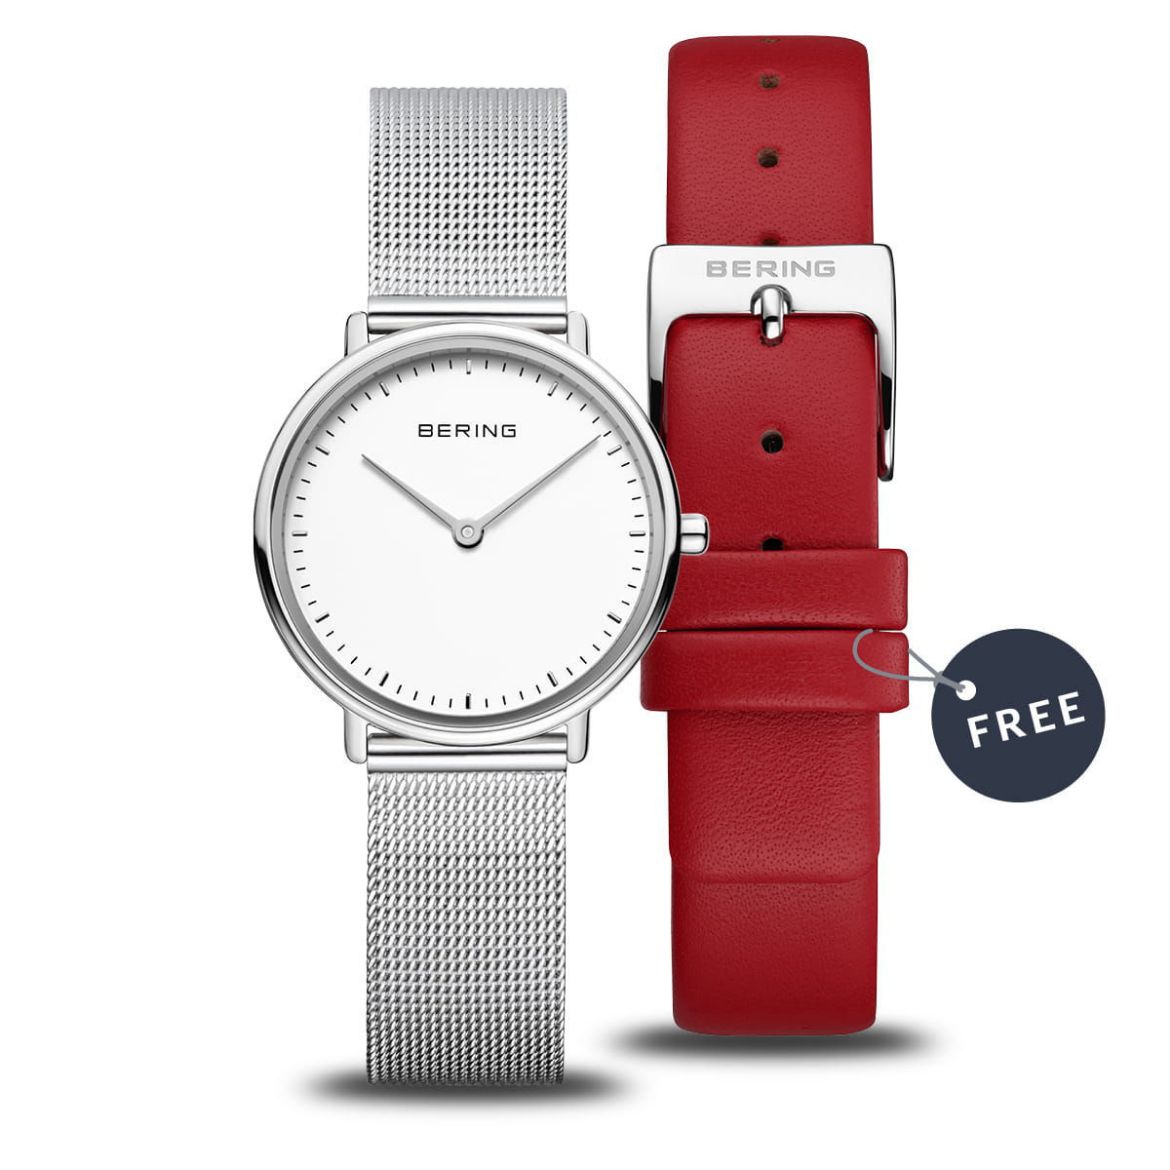 Picture of Silver Ladies Watch with Mesh Strap and a Red Interchangeable Leather Strap